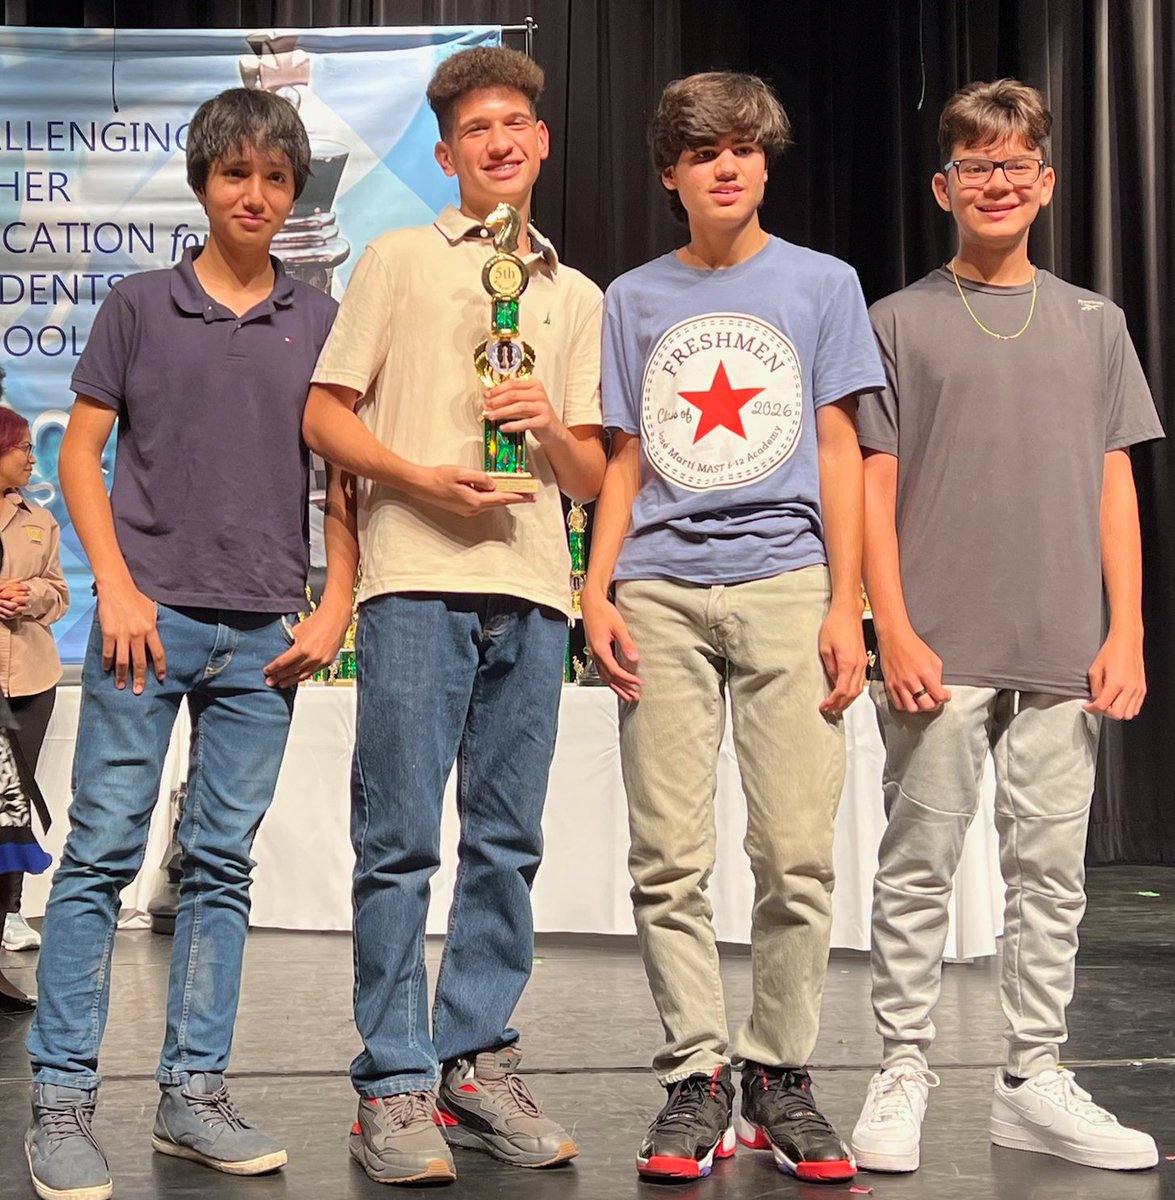 Our Chess Team had a dramatic comeback this past weekend at the North Regional Chess Tournament to qualify for April's District Tournament. Out of 16 High School teams we finished in the Top 5. Pictured (from left) Daniel Fernandez, Gabriel Ferero, Dylan Mut, Diego Morales https://t.co/RTYdjZXgLG